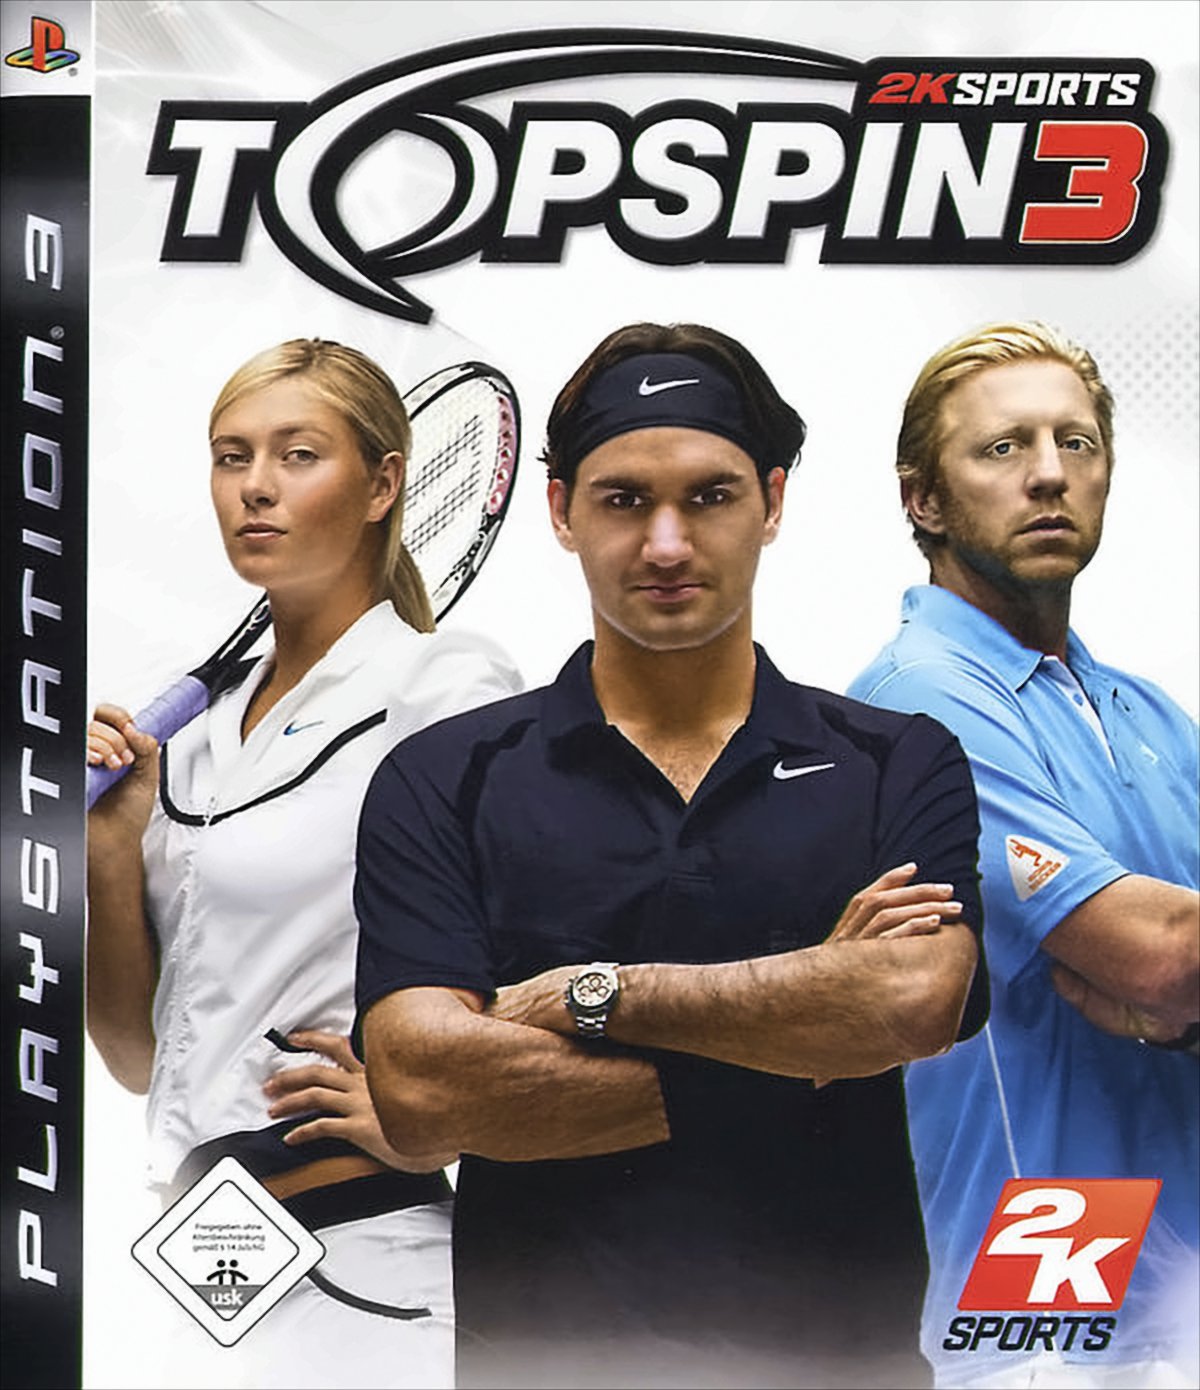 Top Spin 3 von Take-Two Interactive